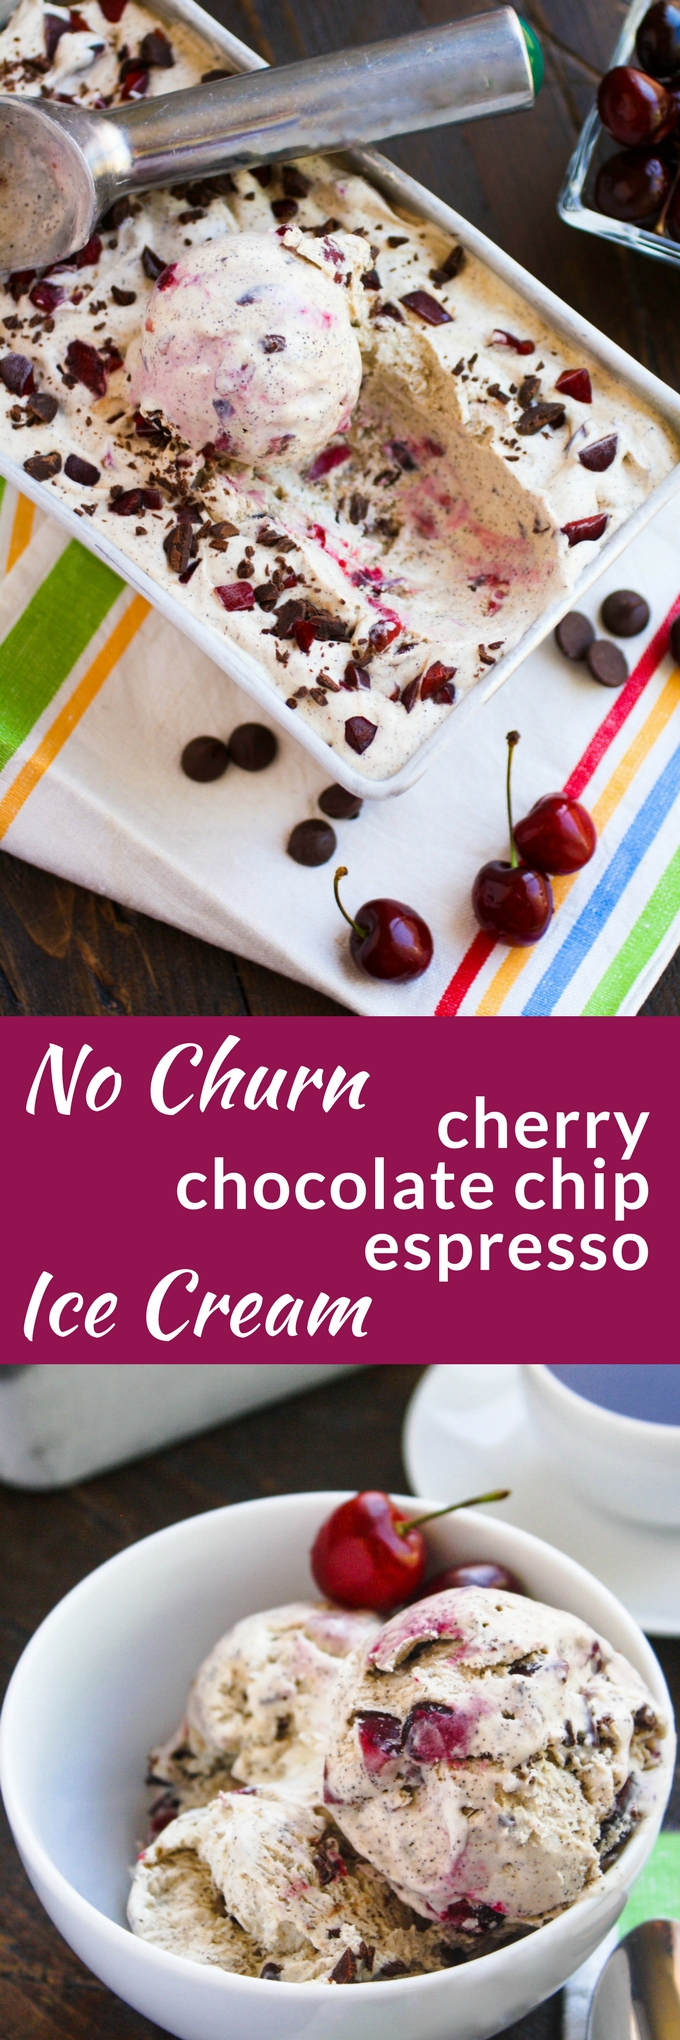 No Churn Cherry Chocolate Chip Espresso Ice Cream is a fun and delicious ice cream dessert! You'll want to make a batch soon -- it's so easy to make!